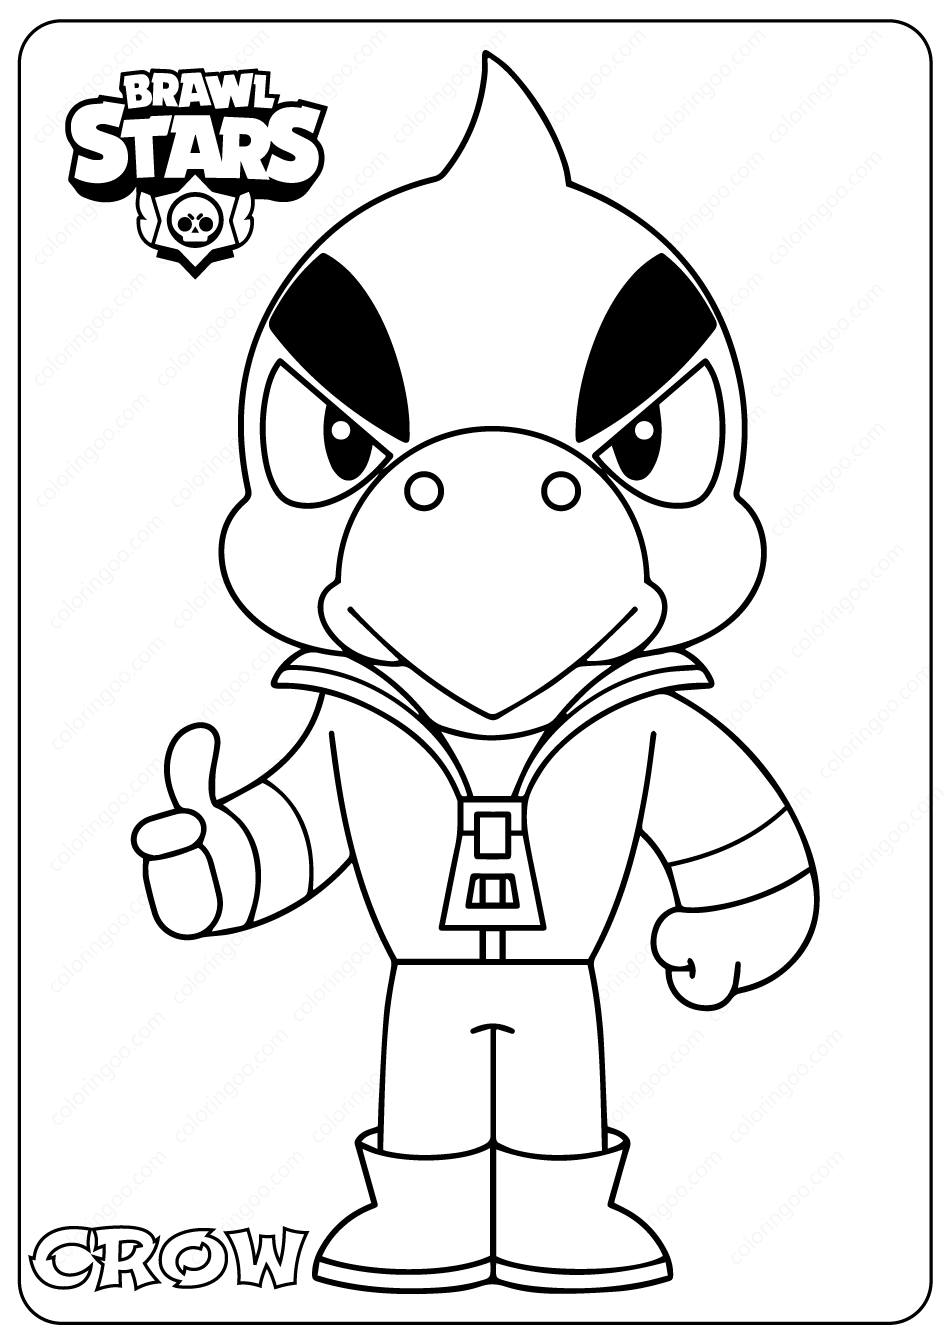 Brawl Stars Coloring Pages Coloring Home - brawl stars crow phoenix coloring